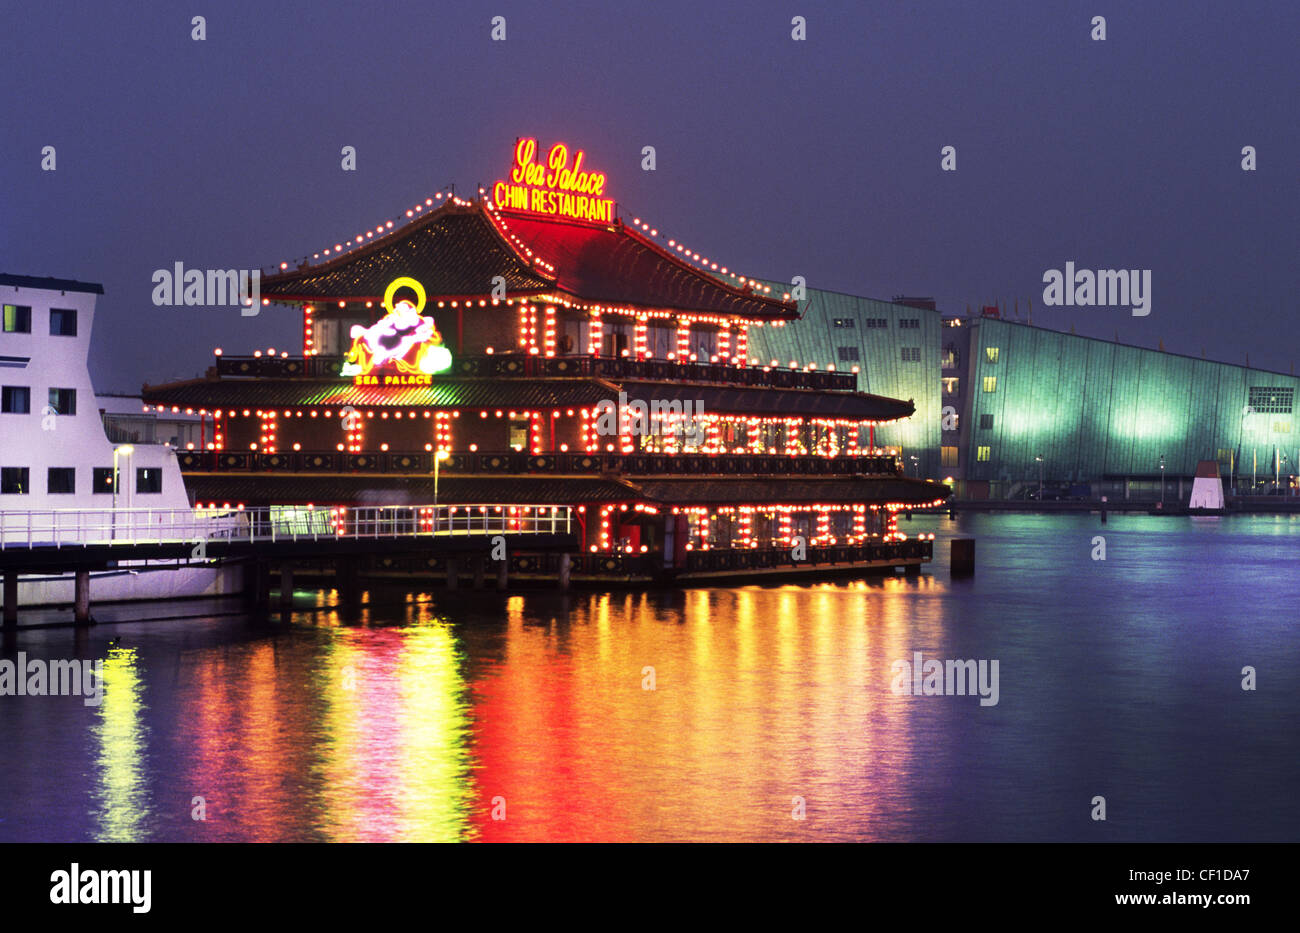 vlotter frequentie pijp Sea Palace" floating Chinese Restaurant. Amsterdam, The Netherlands Stock  Photo - Alamy